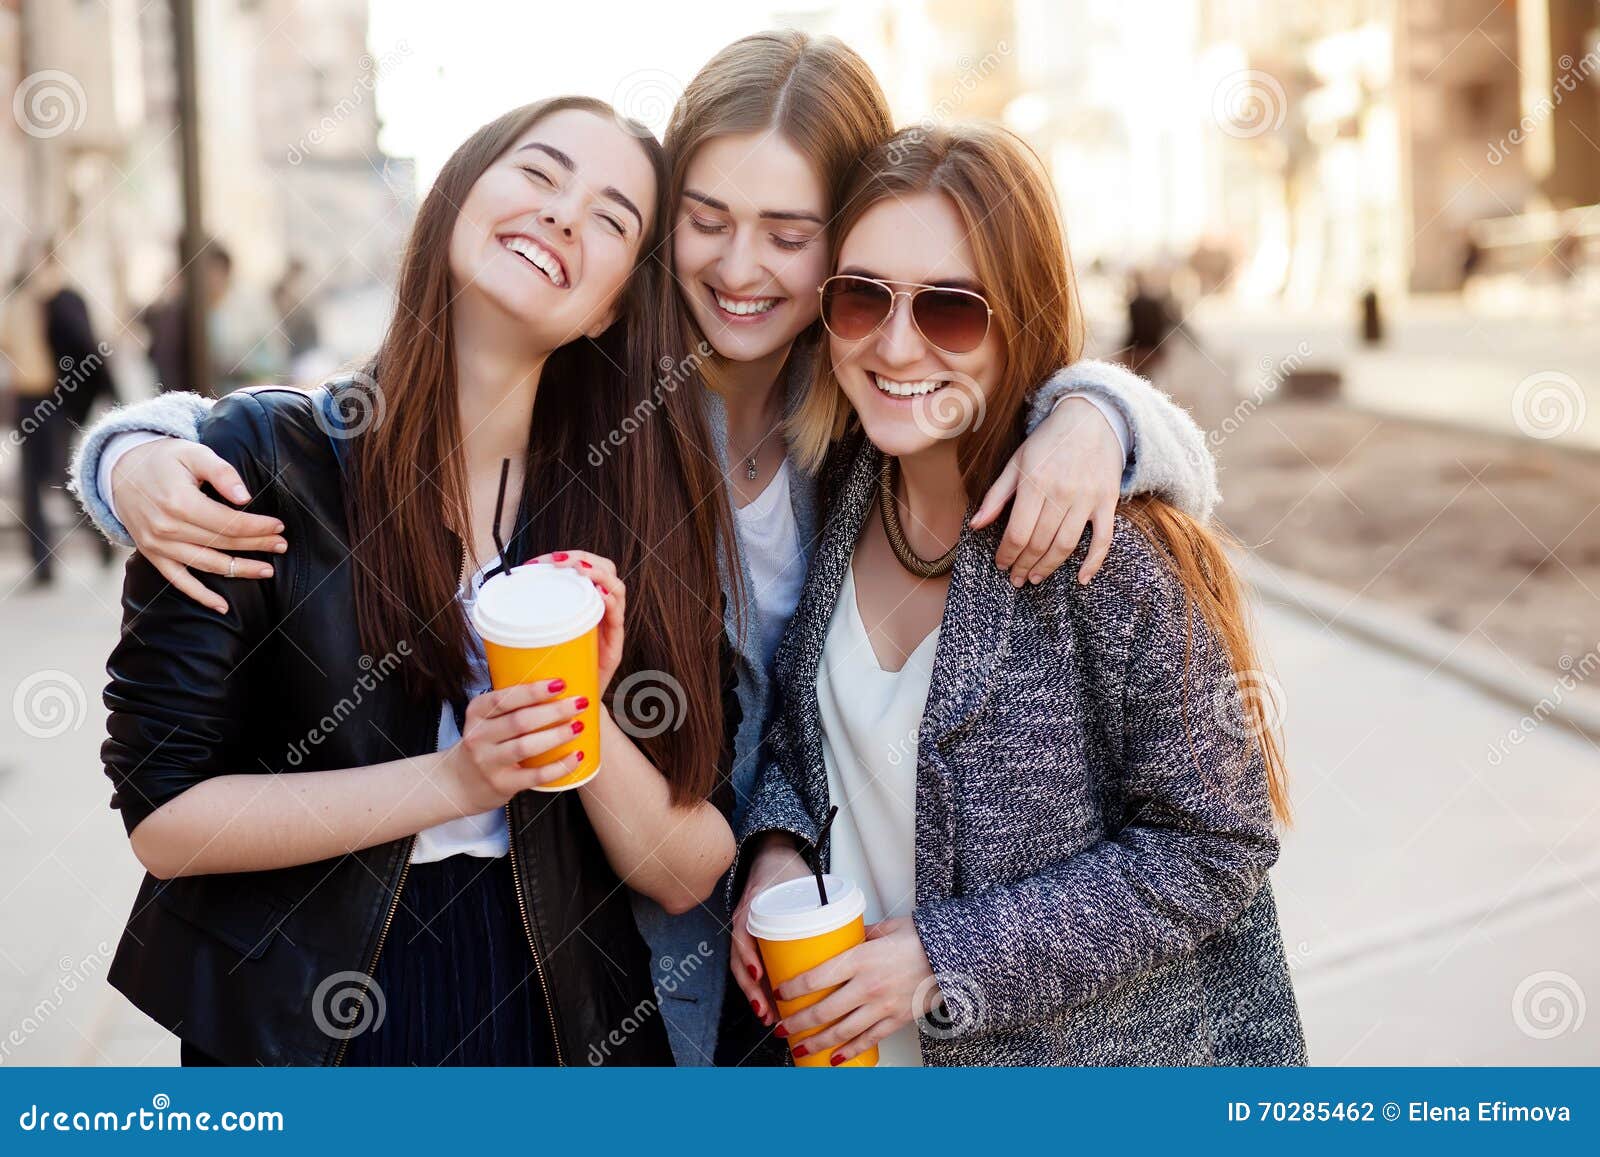 Three Young Women, Best Friends Smiling at the Camera Stock Photo ...